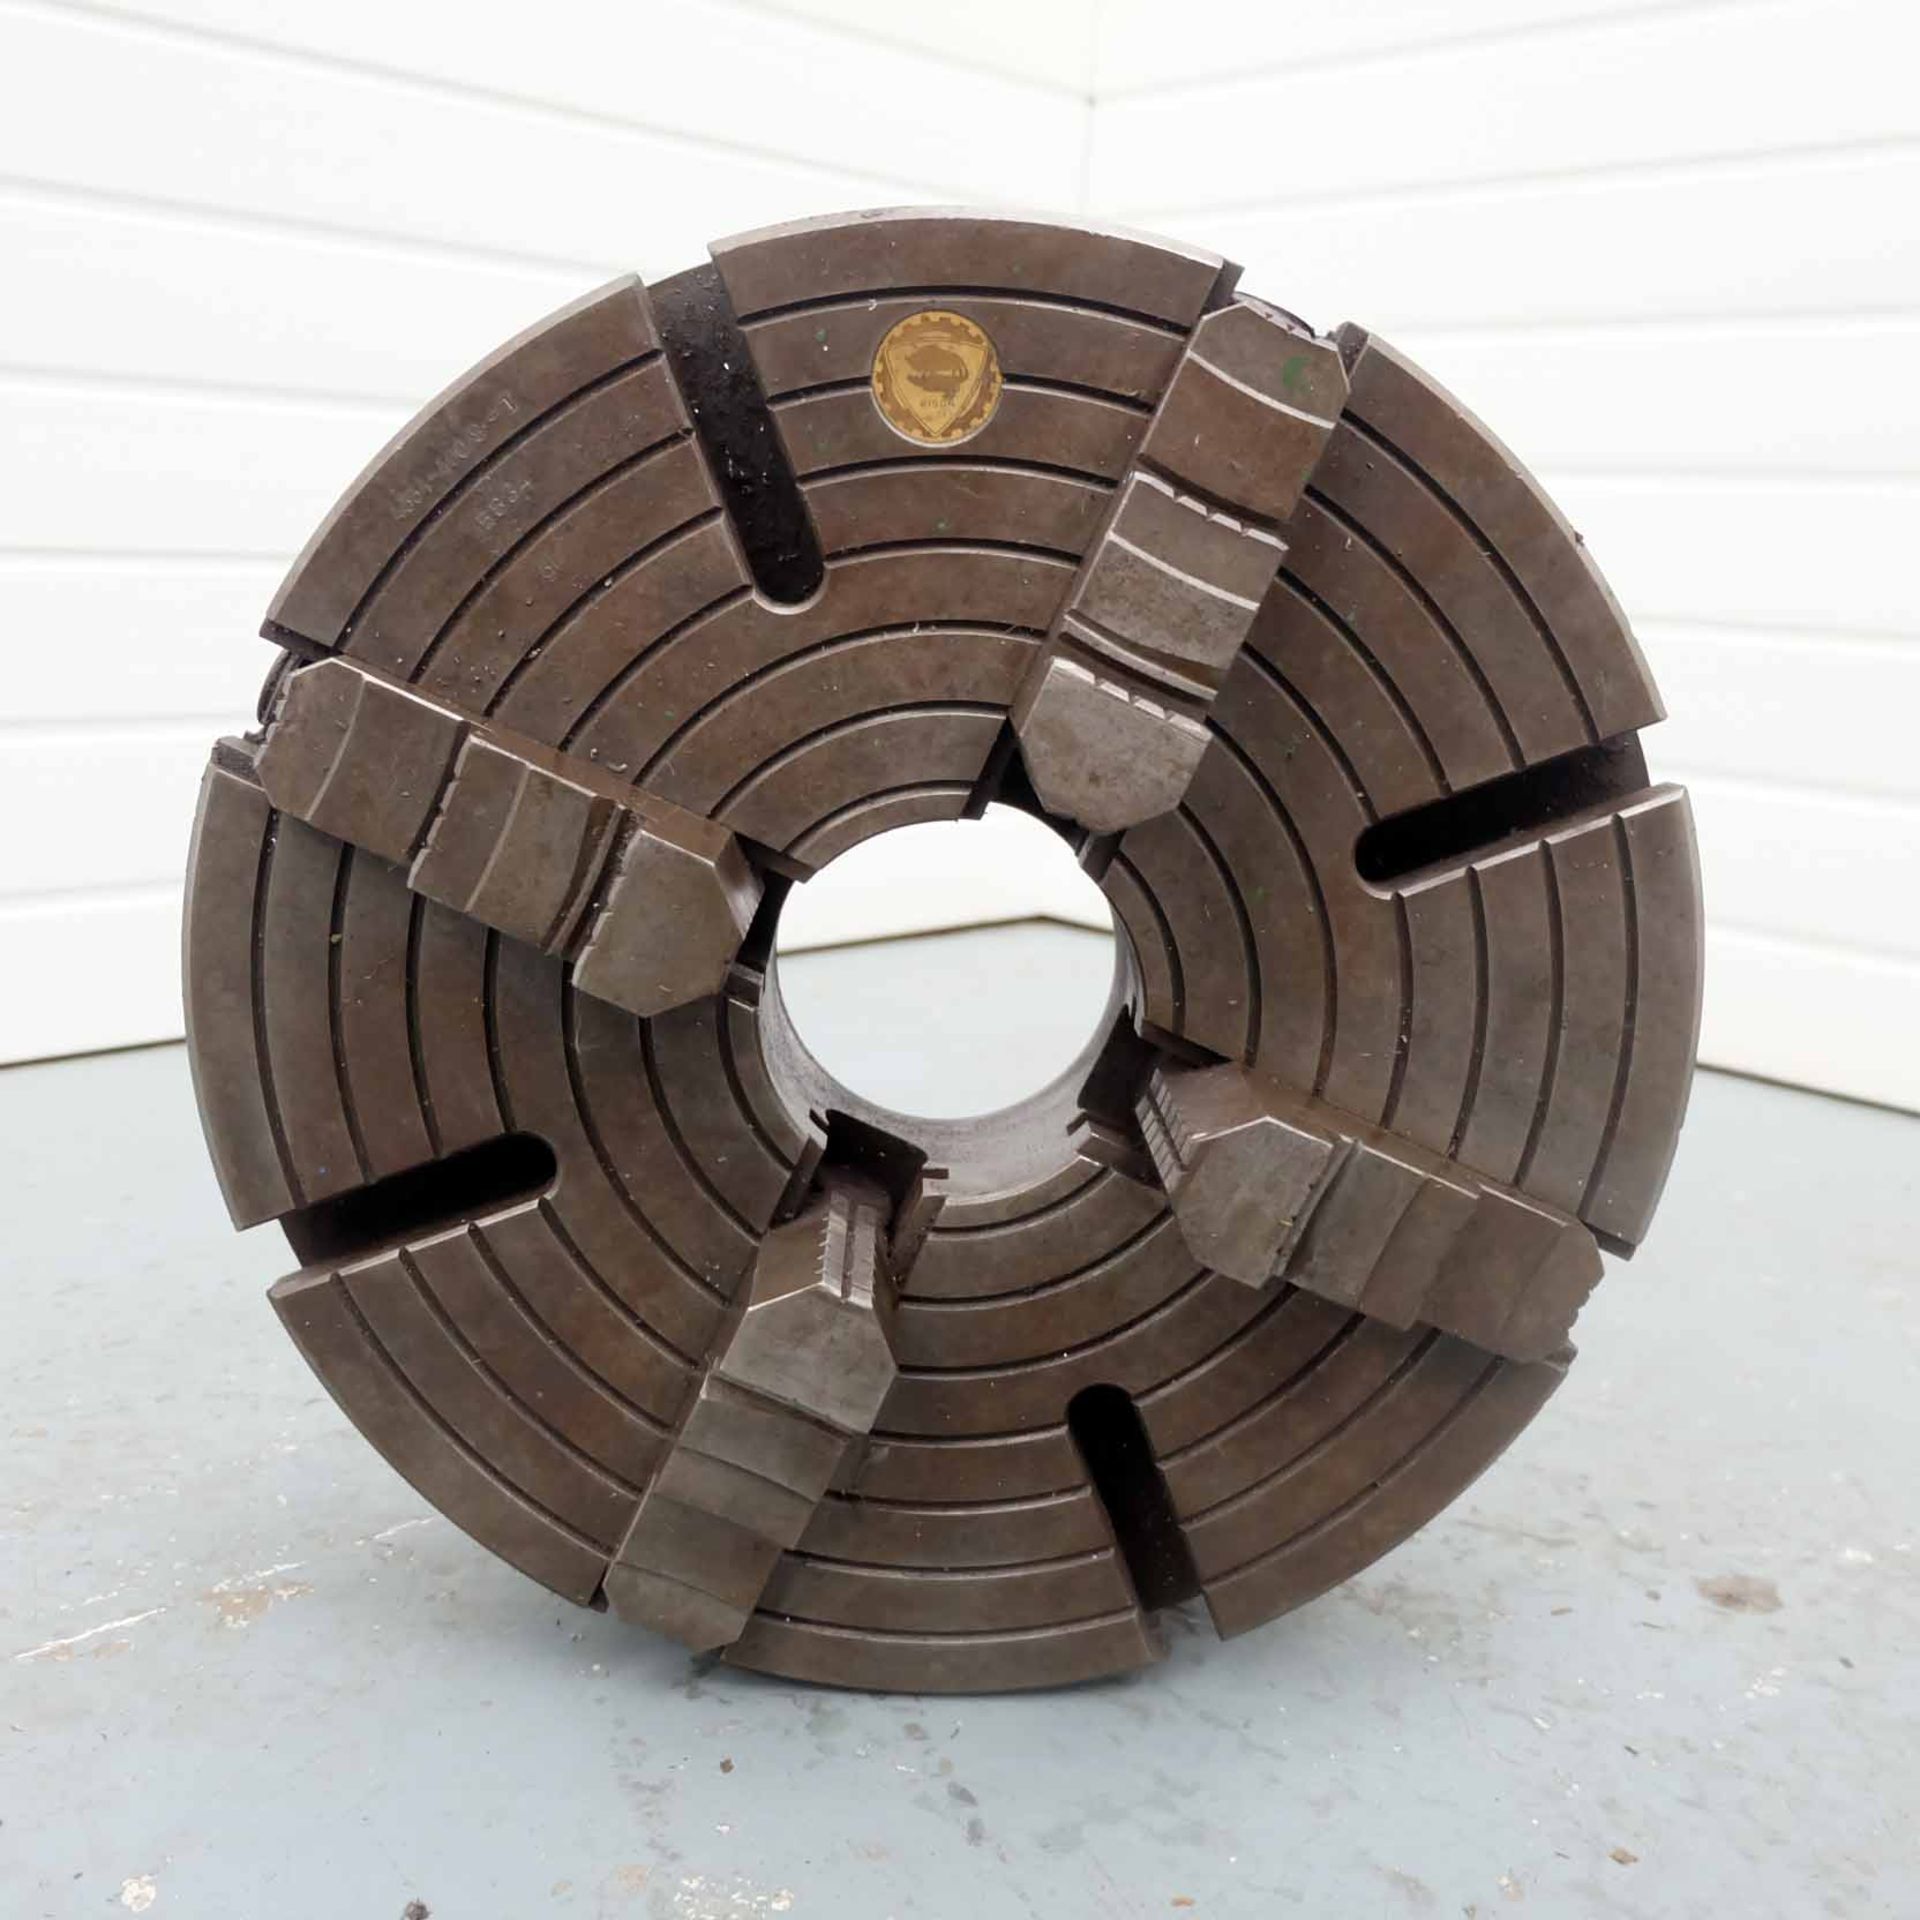 Bison 400mm Diameter Independent Four Jaw Chuck. Fitting 4 Bolts 170mm PCD. Spindle Bore 100mm.